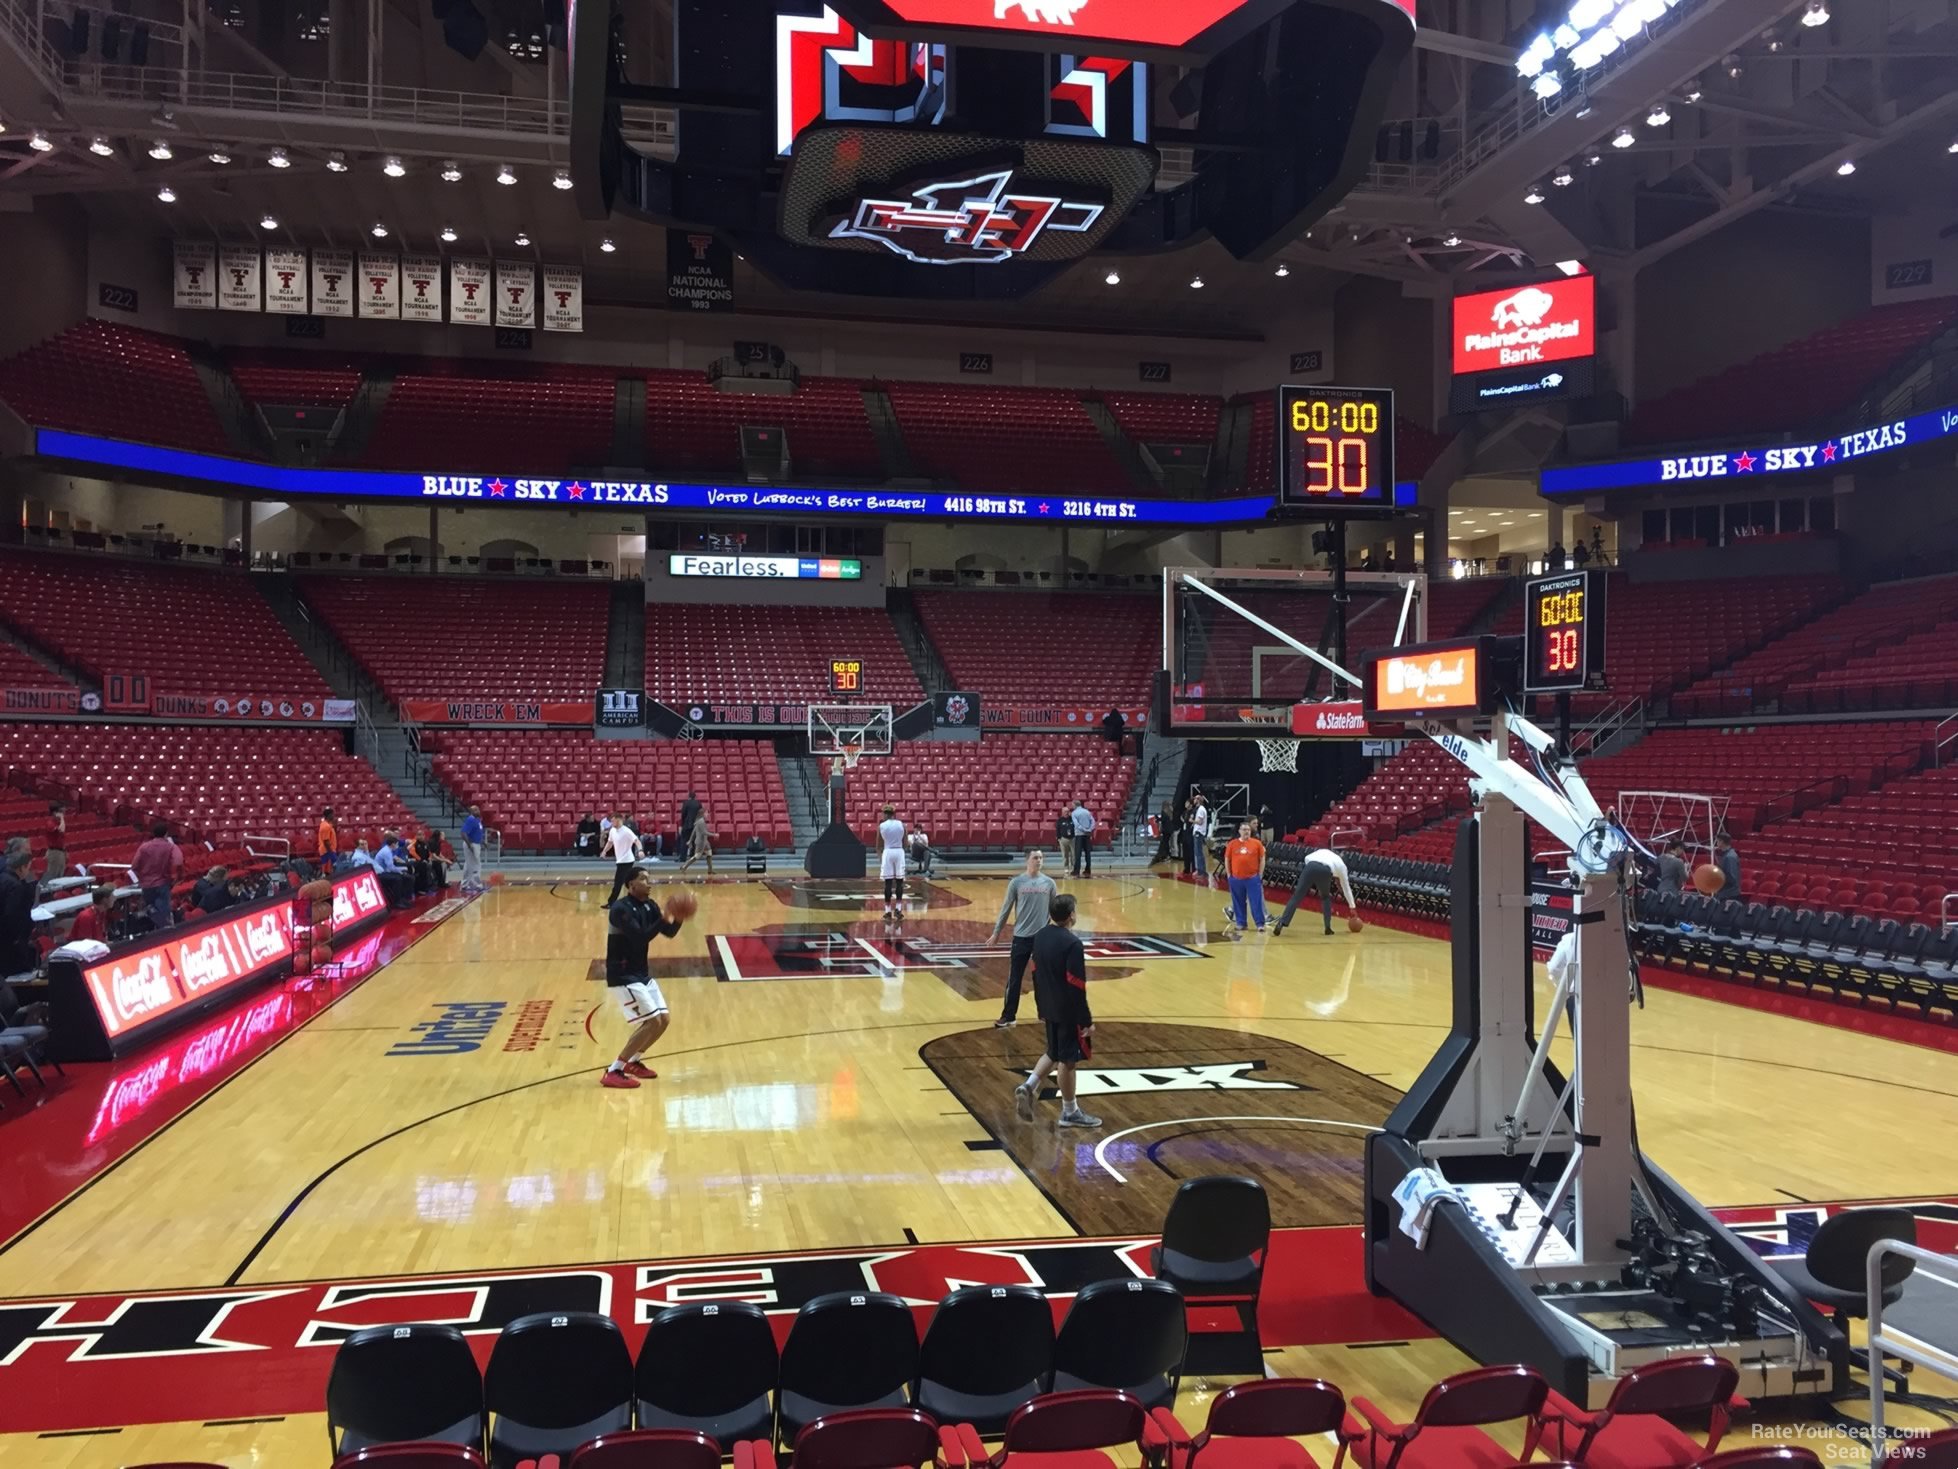 section 108, row 7 seat view  - united supermarkets arena